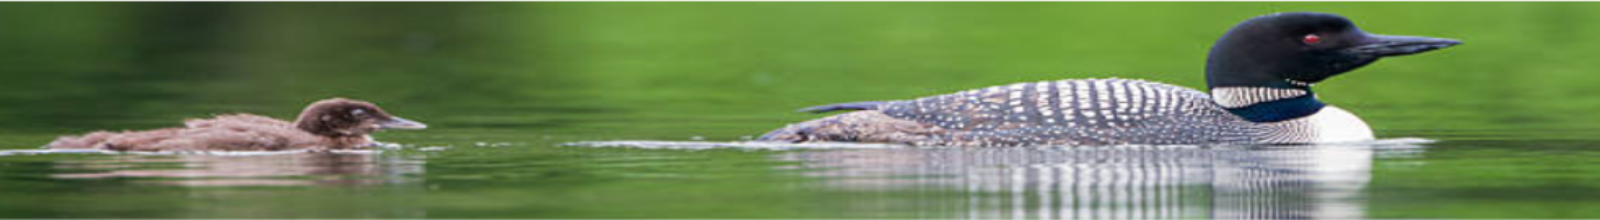 Loon swimming in Water